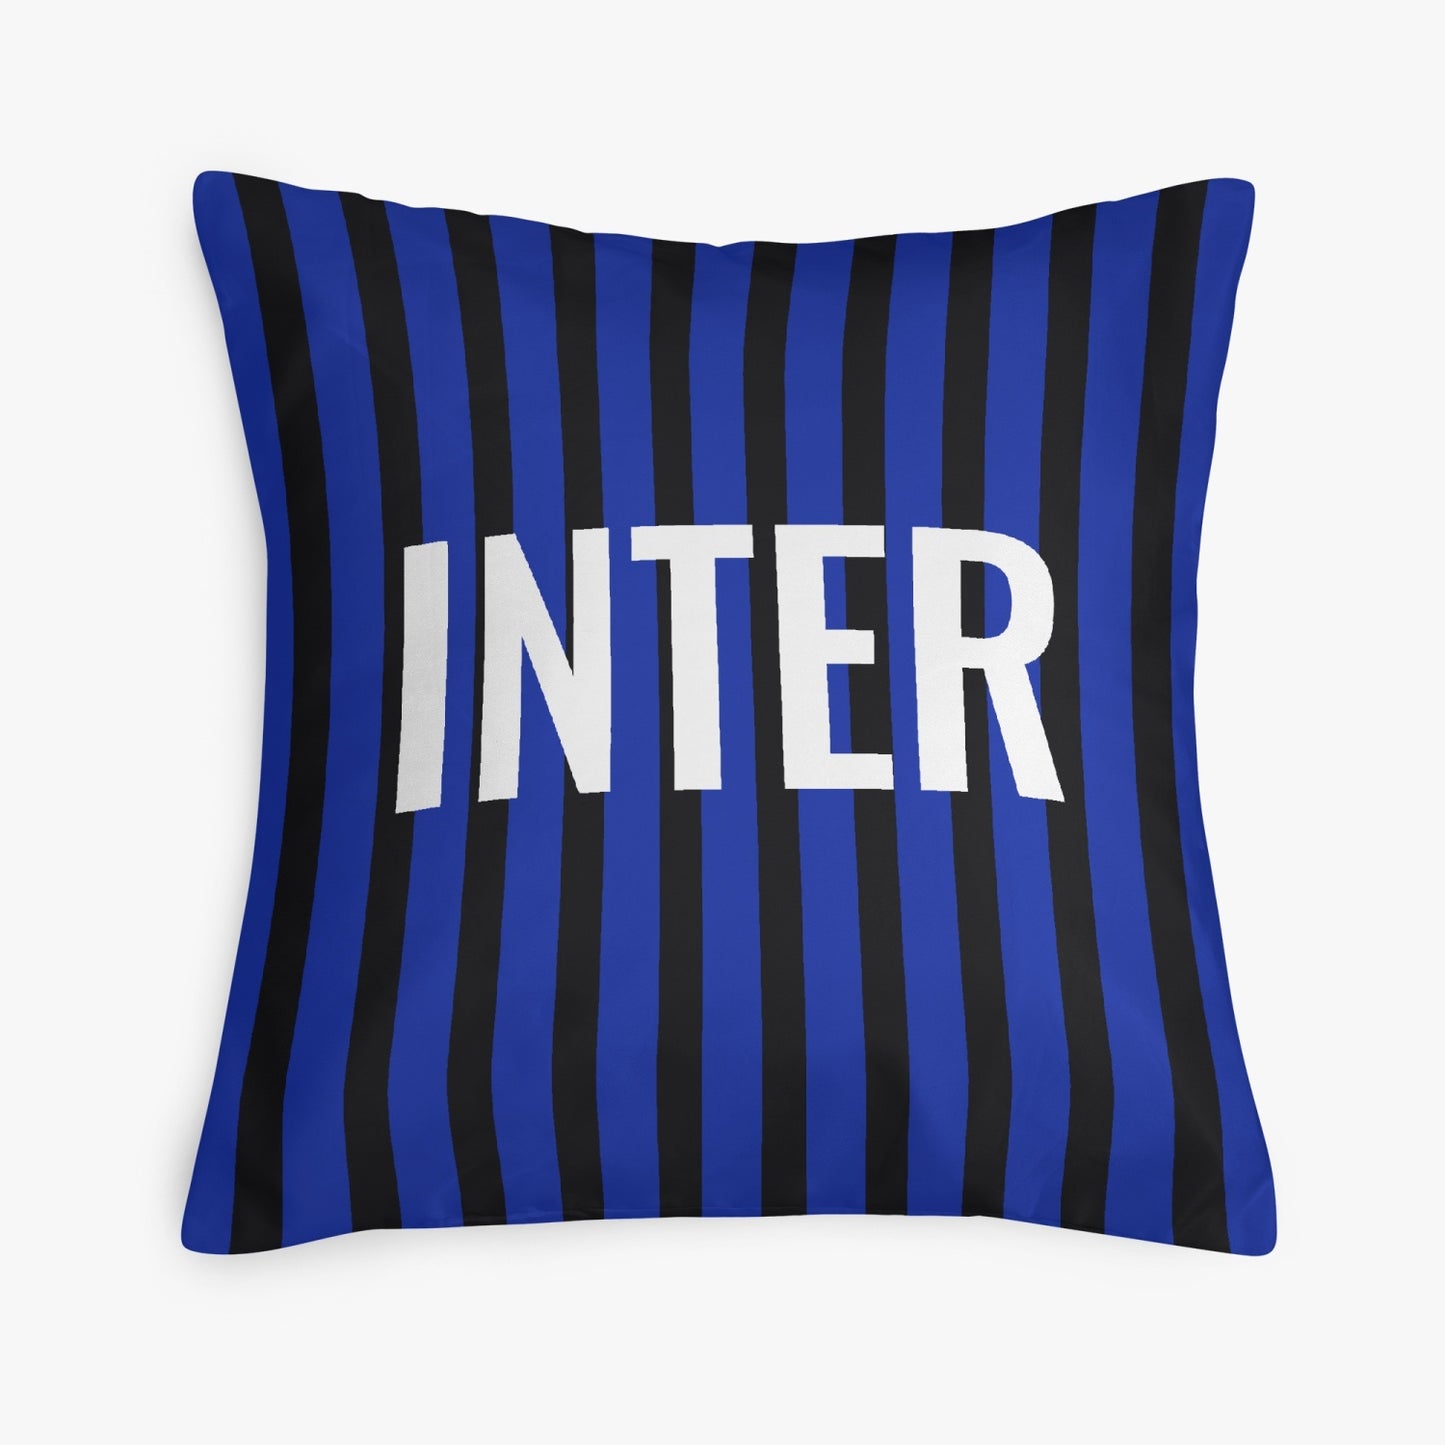 Inter Pillow Cover